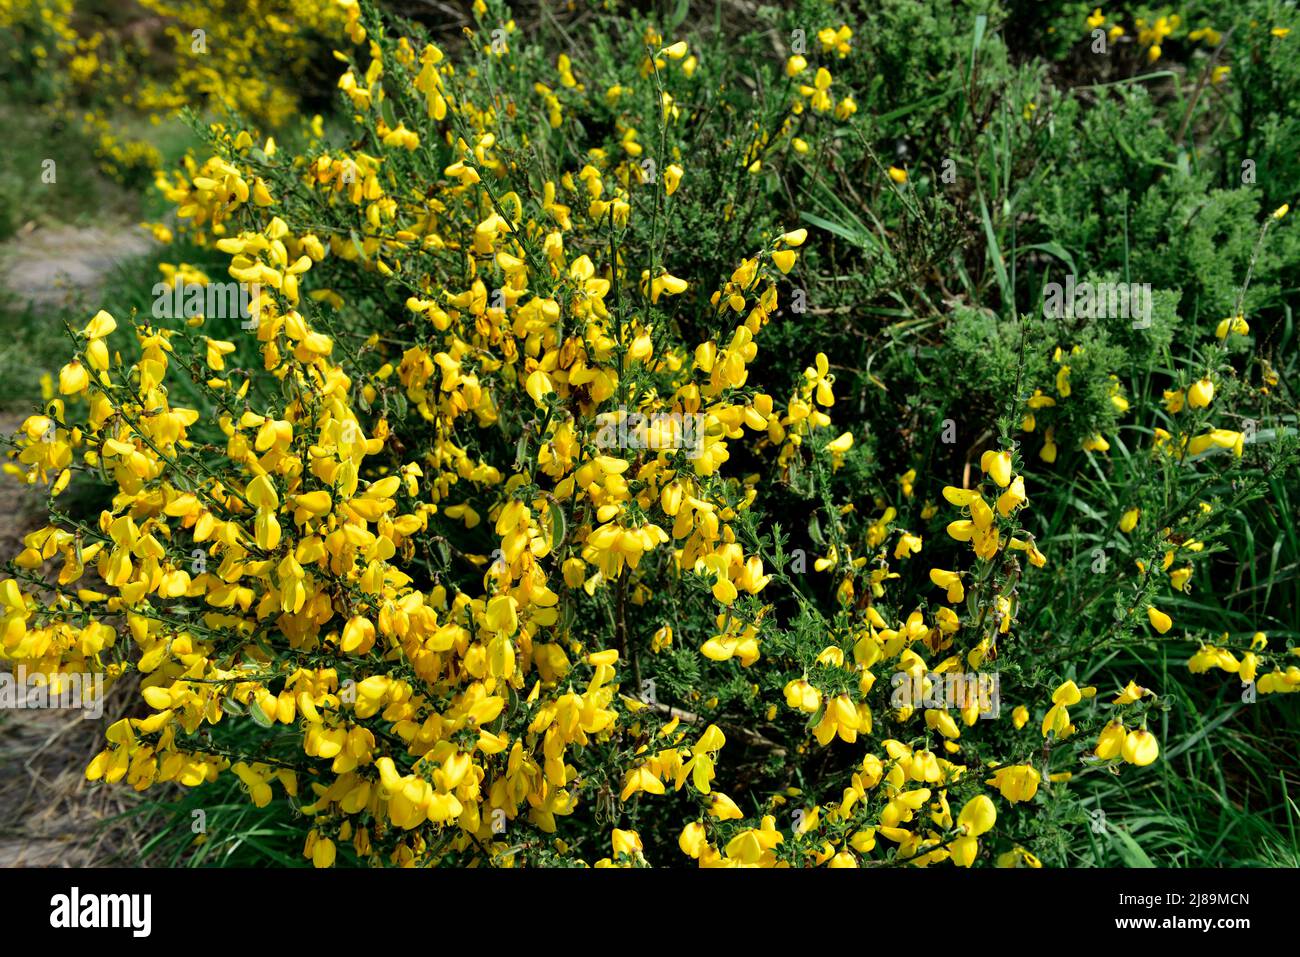 UK native common broom, Cytisus scoparius, growing by footpath on Bristol Troopers' Hill former mining area now park and nature reserve, UK Stock Photo